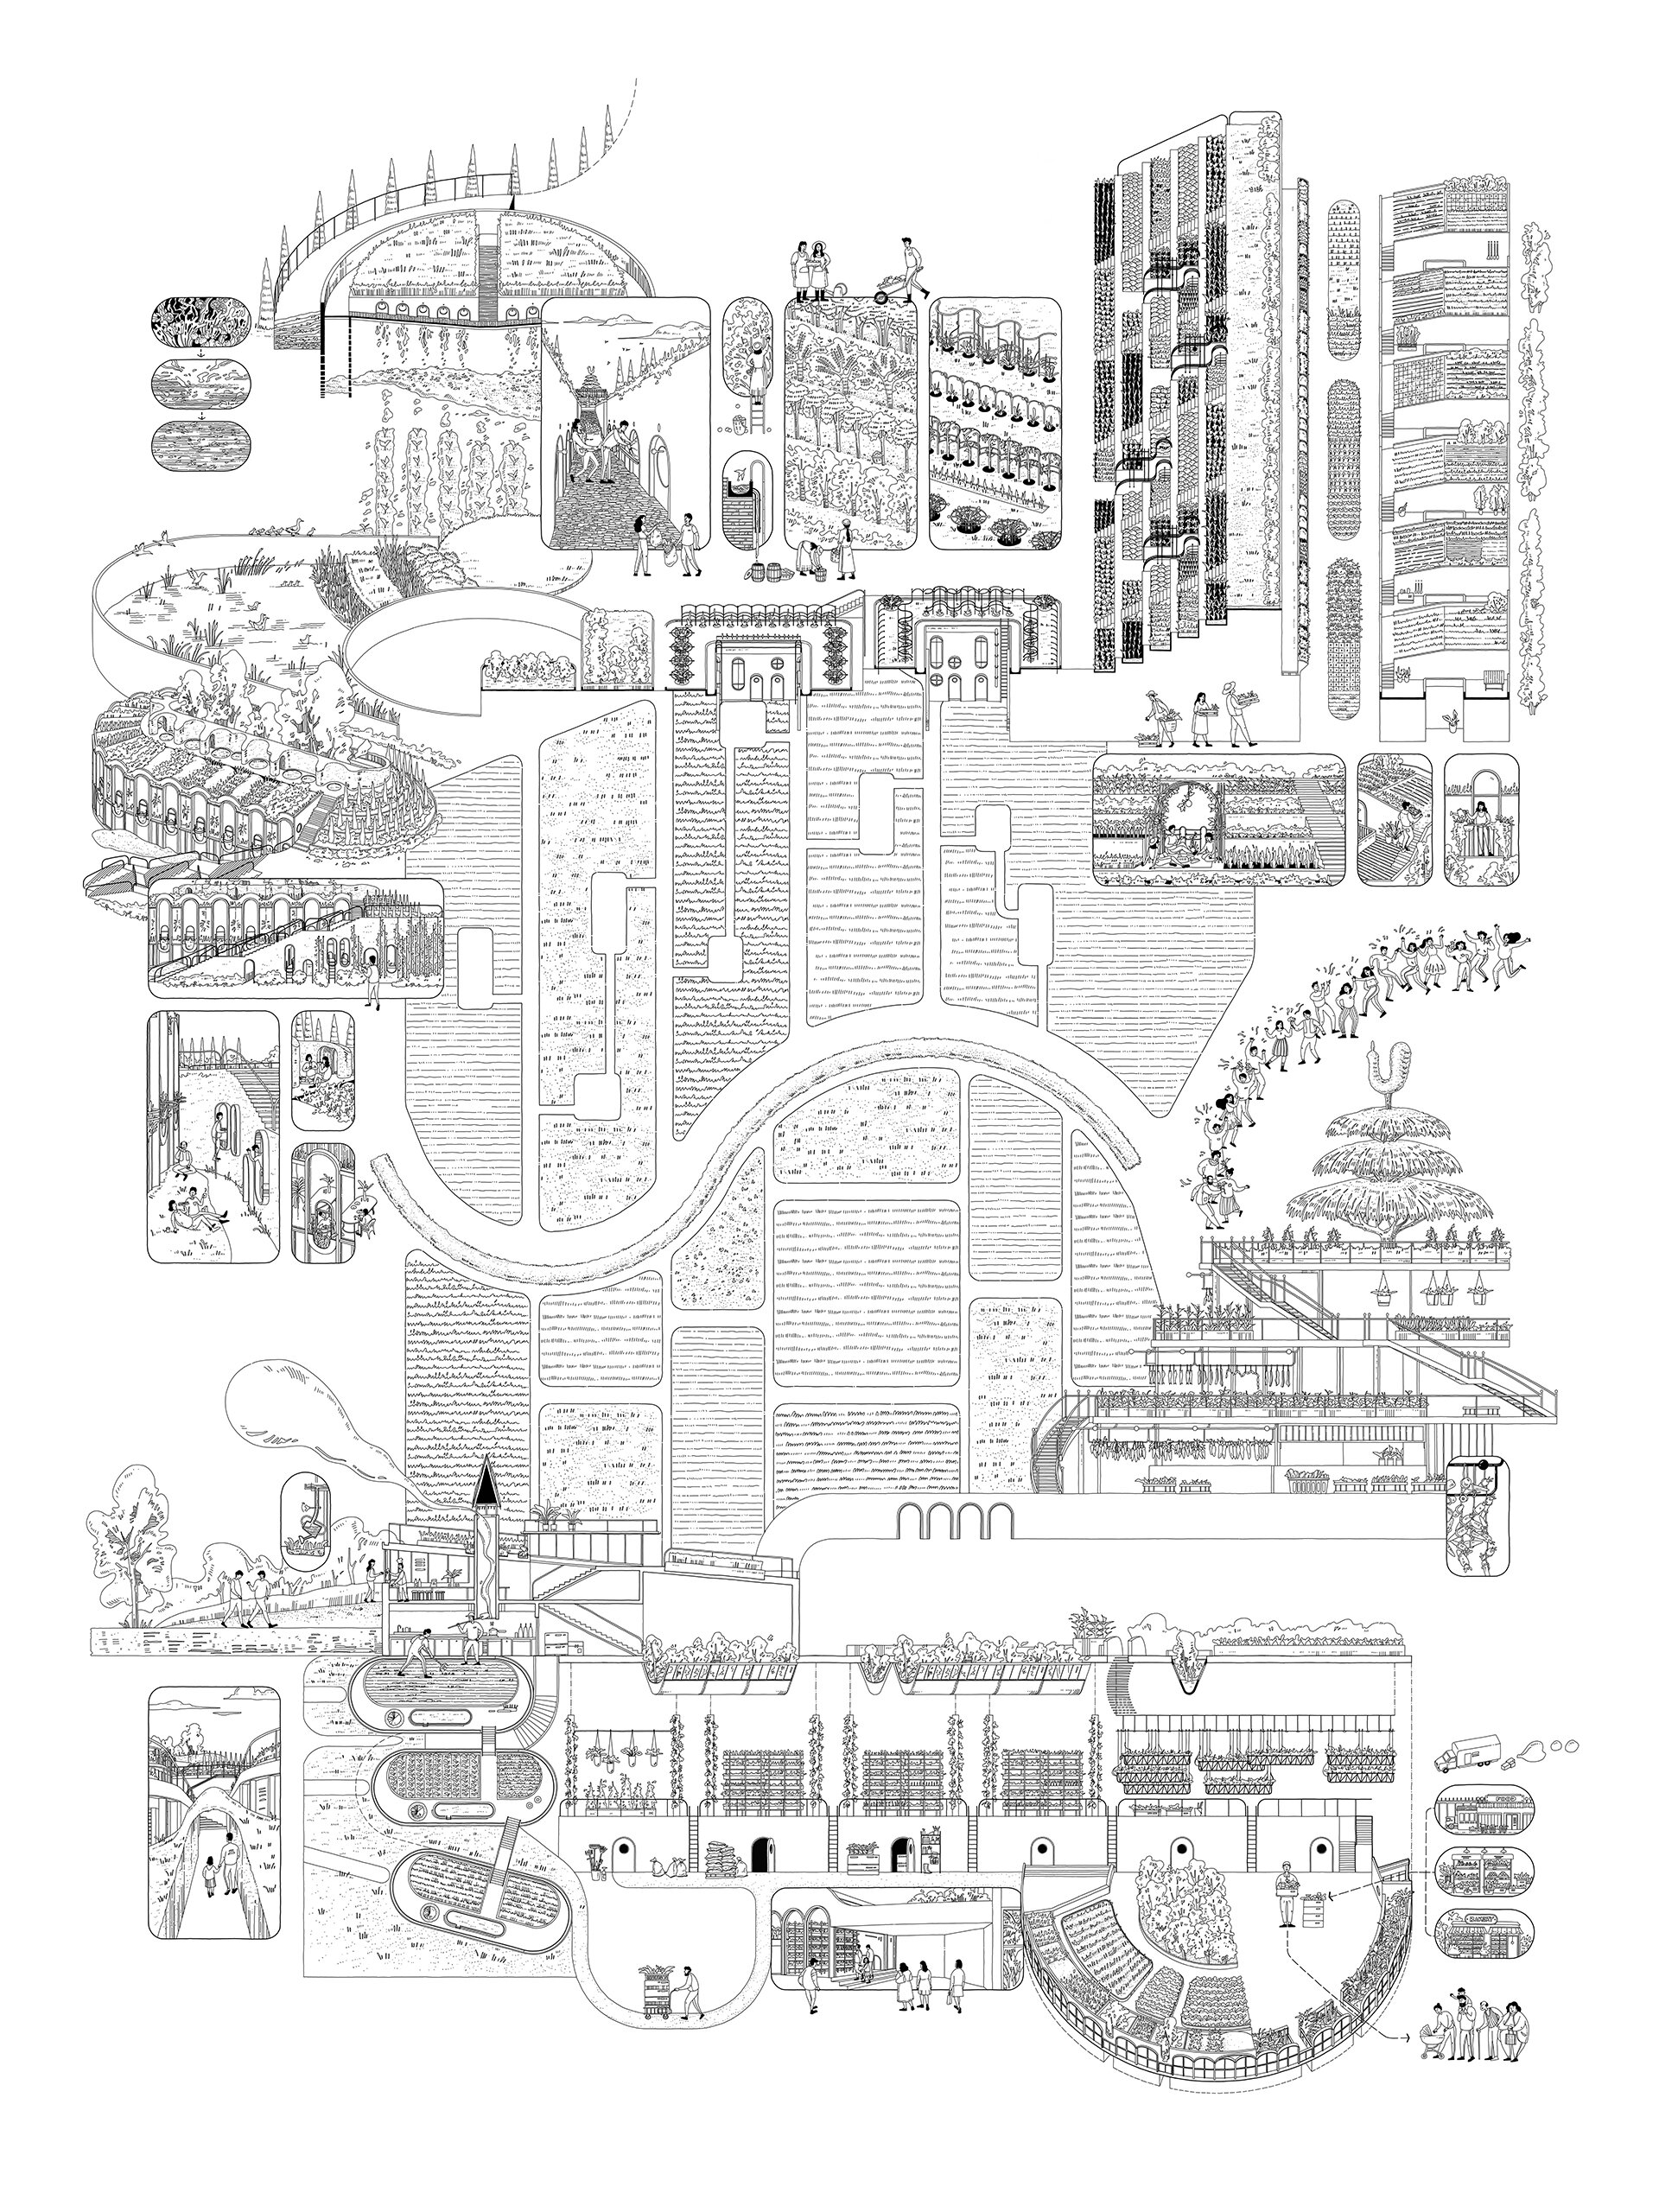 Productive Landscape - Regent’s Park Food Community_Meiying Hong_MArch Year 5, Bartlett School of Architecture, UCL 11.jpg